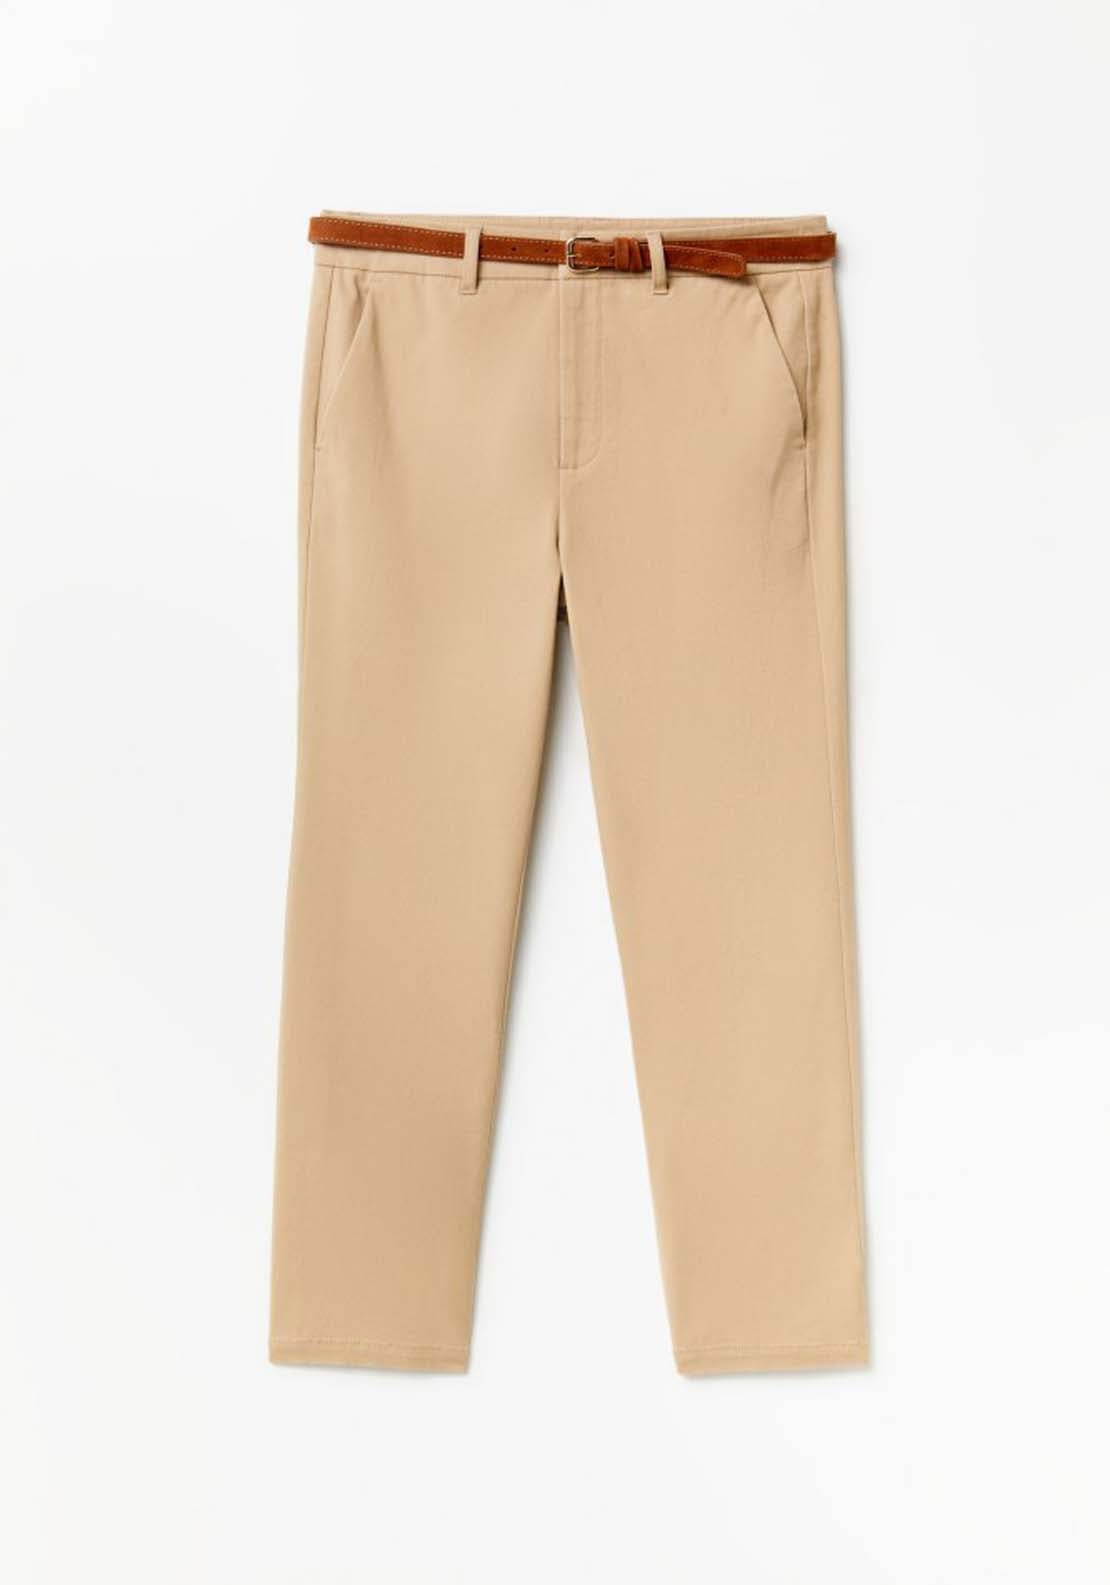 Sfera Belted chino trousers - Camel 6 Shaws Department Stores